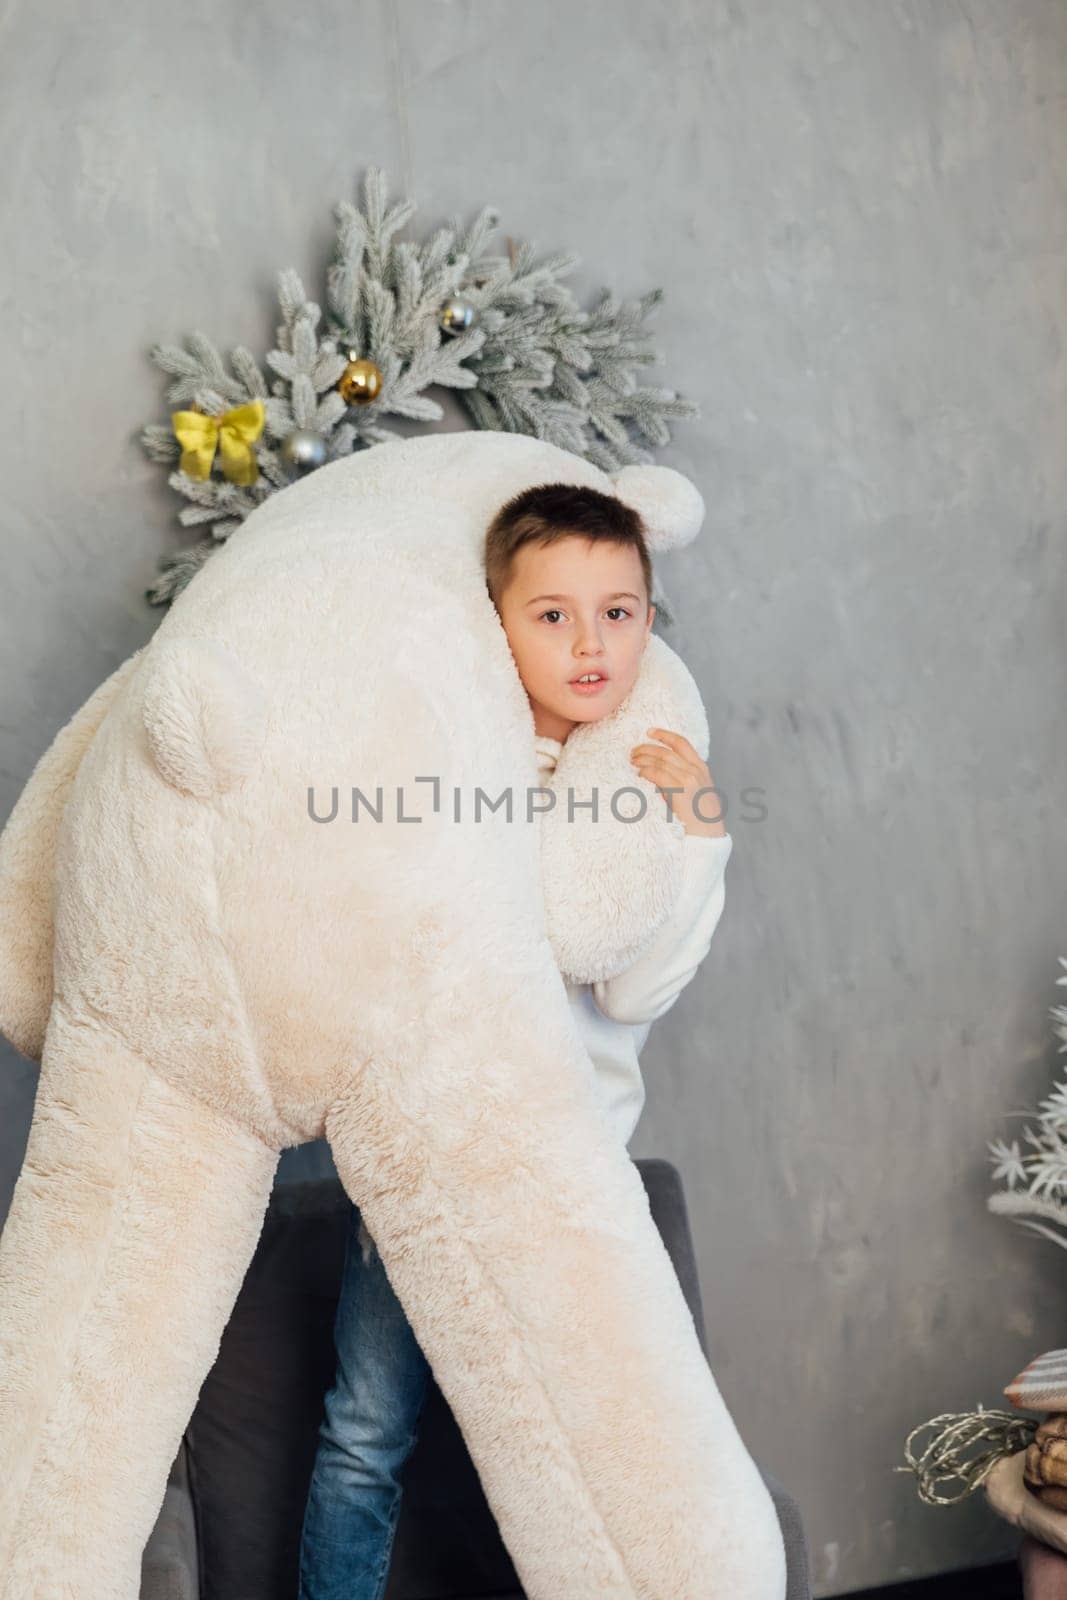 Boy holding a big teddy bear at the Christmas tree for the new year by Simakov